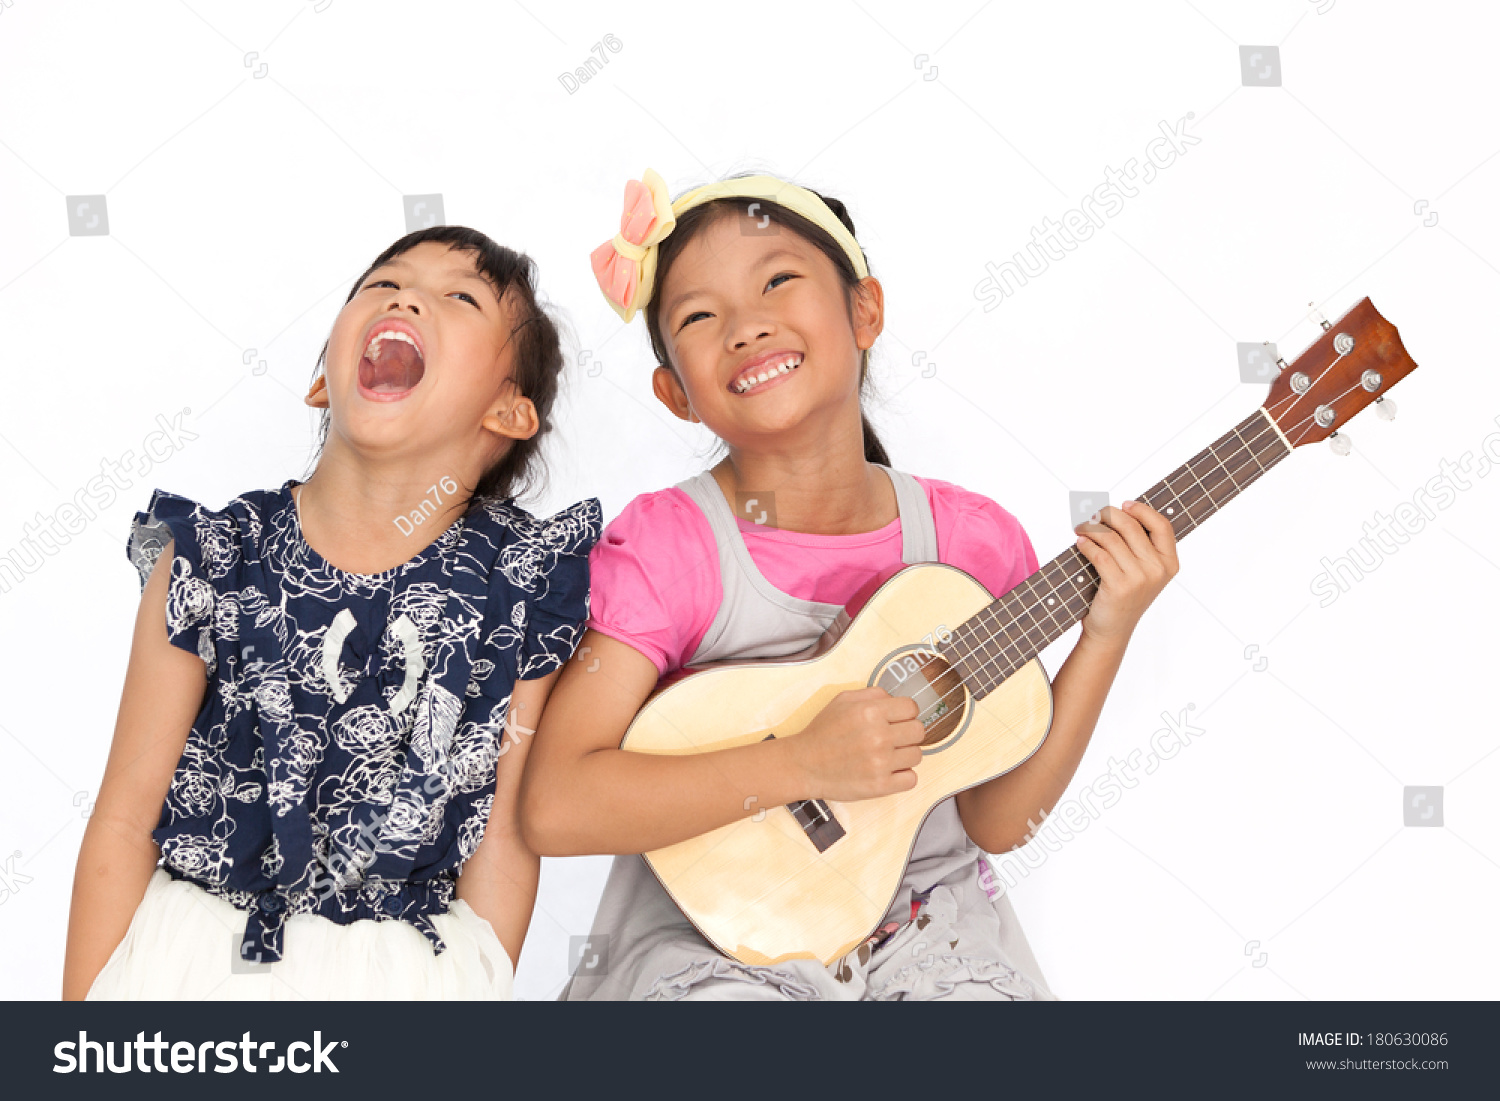 Little asian girls sing a song and playing ukulele isolate on white background #180630086